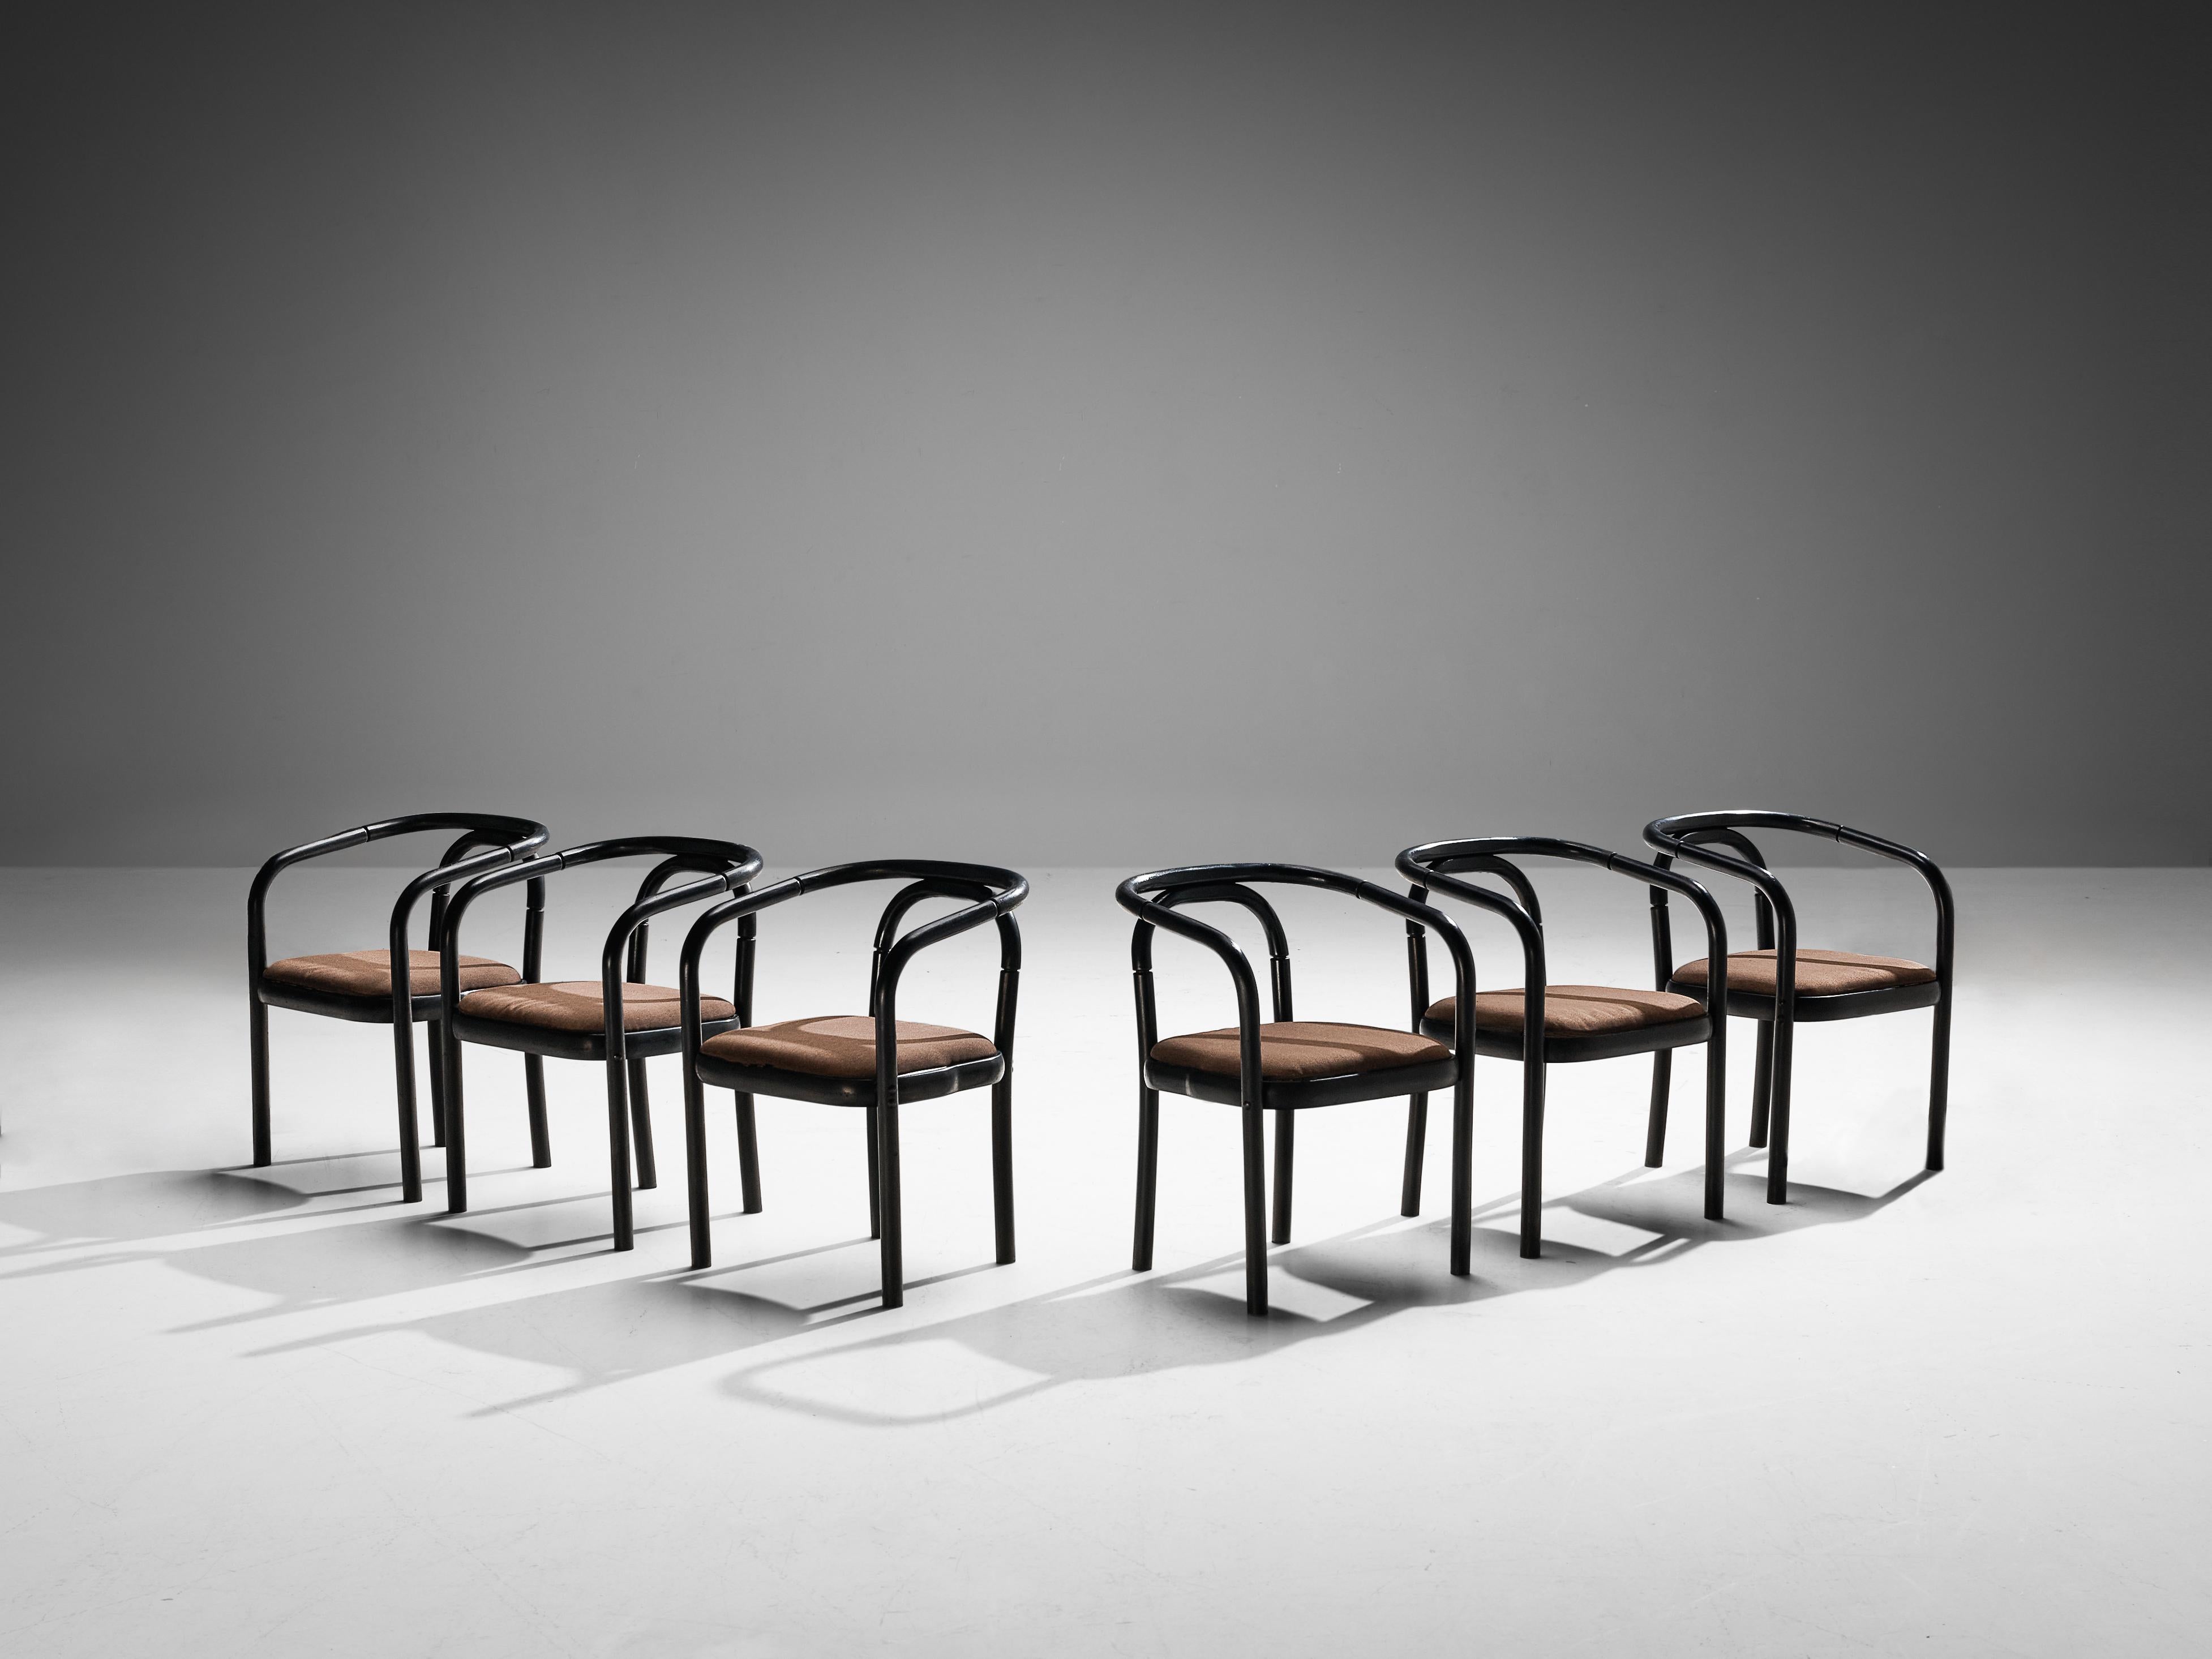 Antonin Suman for TON, set of six armchairs, model E4309, lacquered wood, fabric, Czech Republic, 1977

A set of six dining chairs that were designed by Antonin Suman and manufactured by TON. These chairs feature a wonderful bentwood frame finished